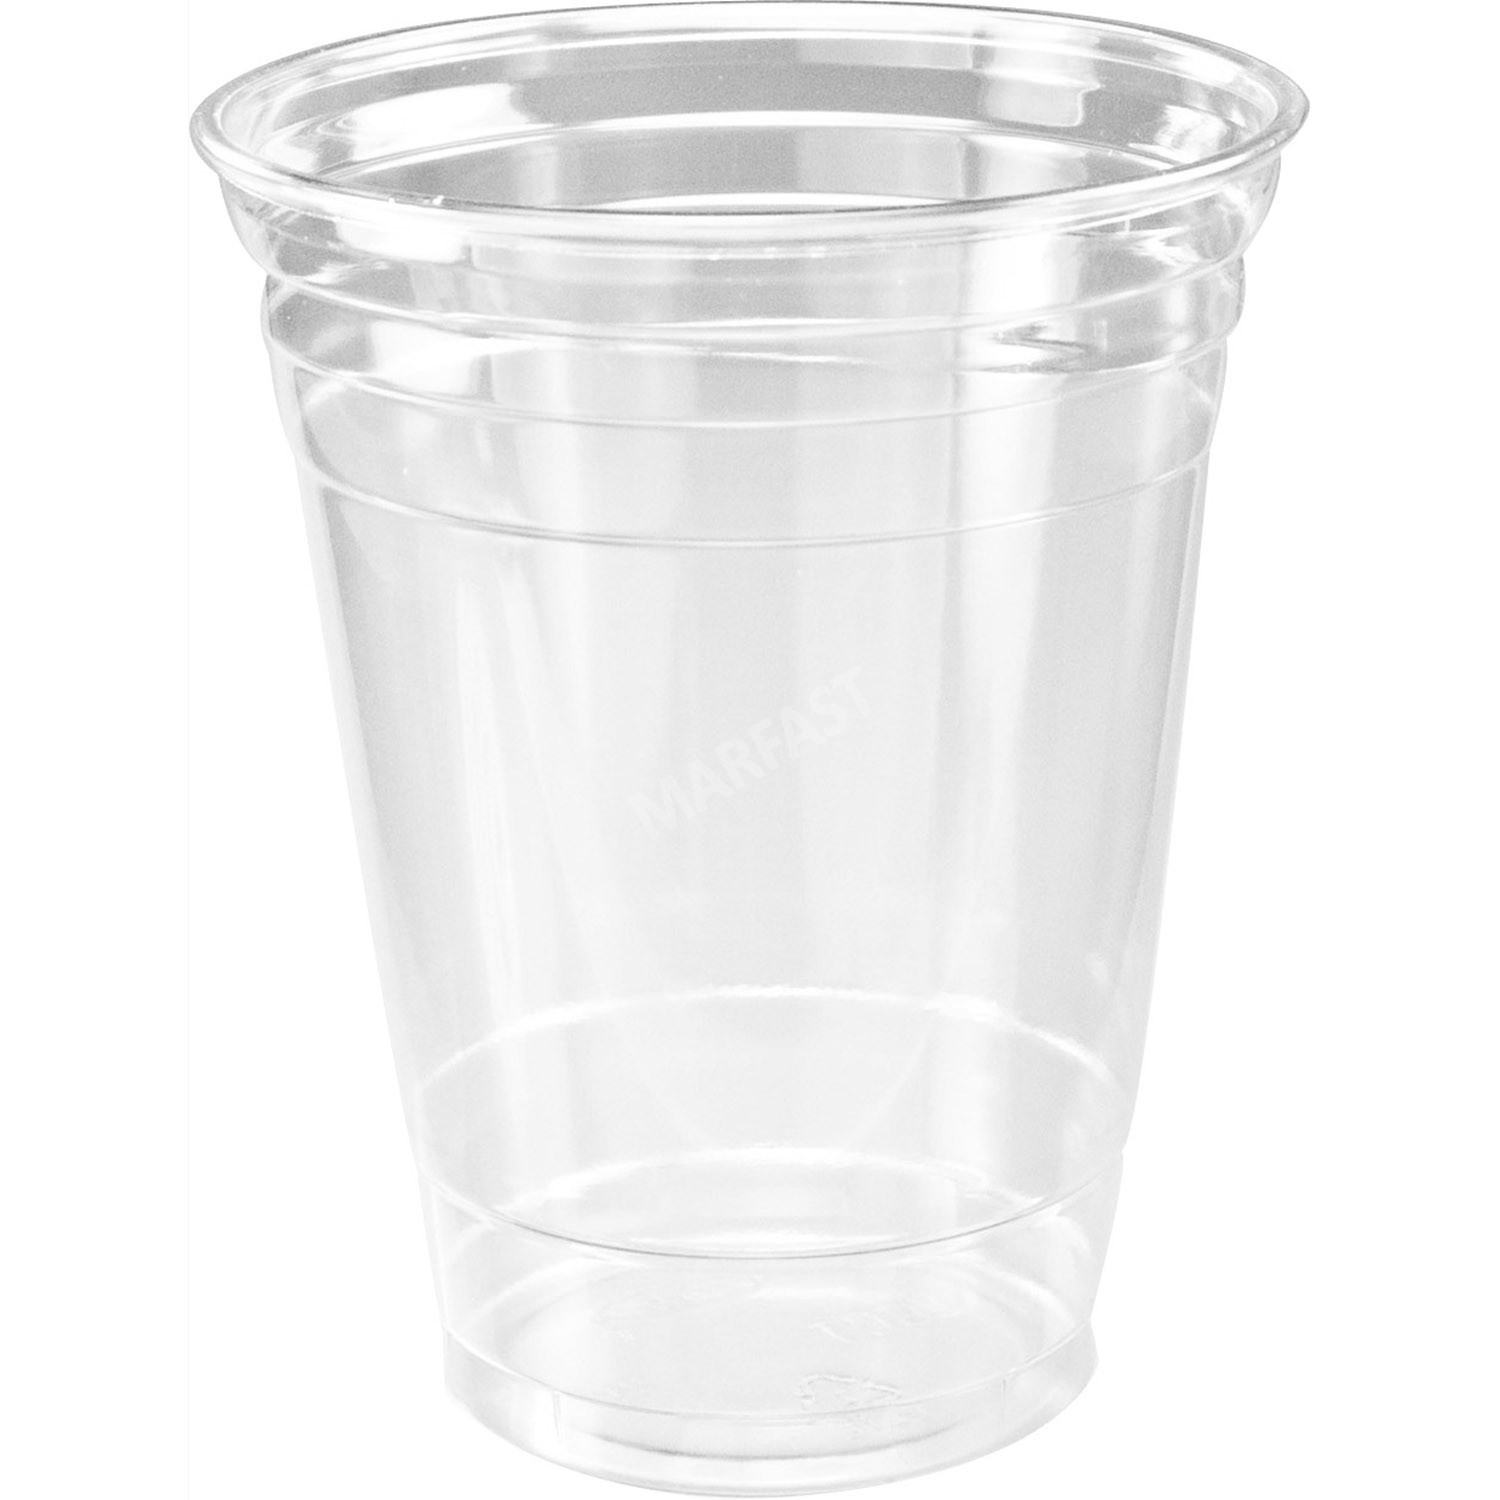 16 OZ STRAIGHT WALL PET CUP
1000/CASE